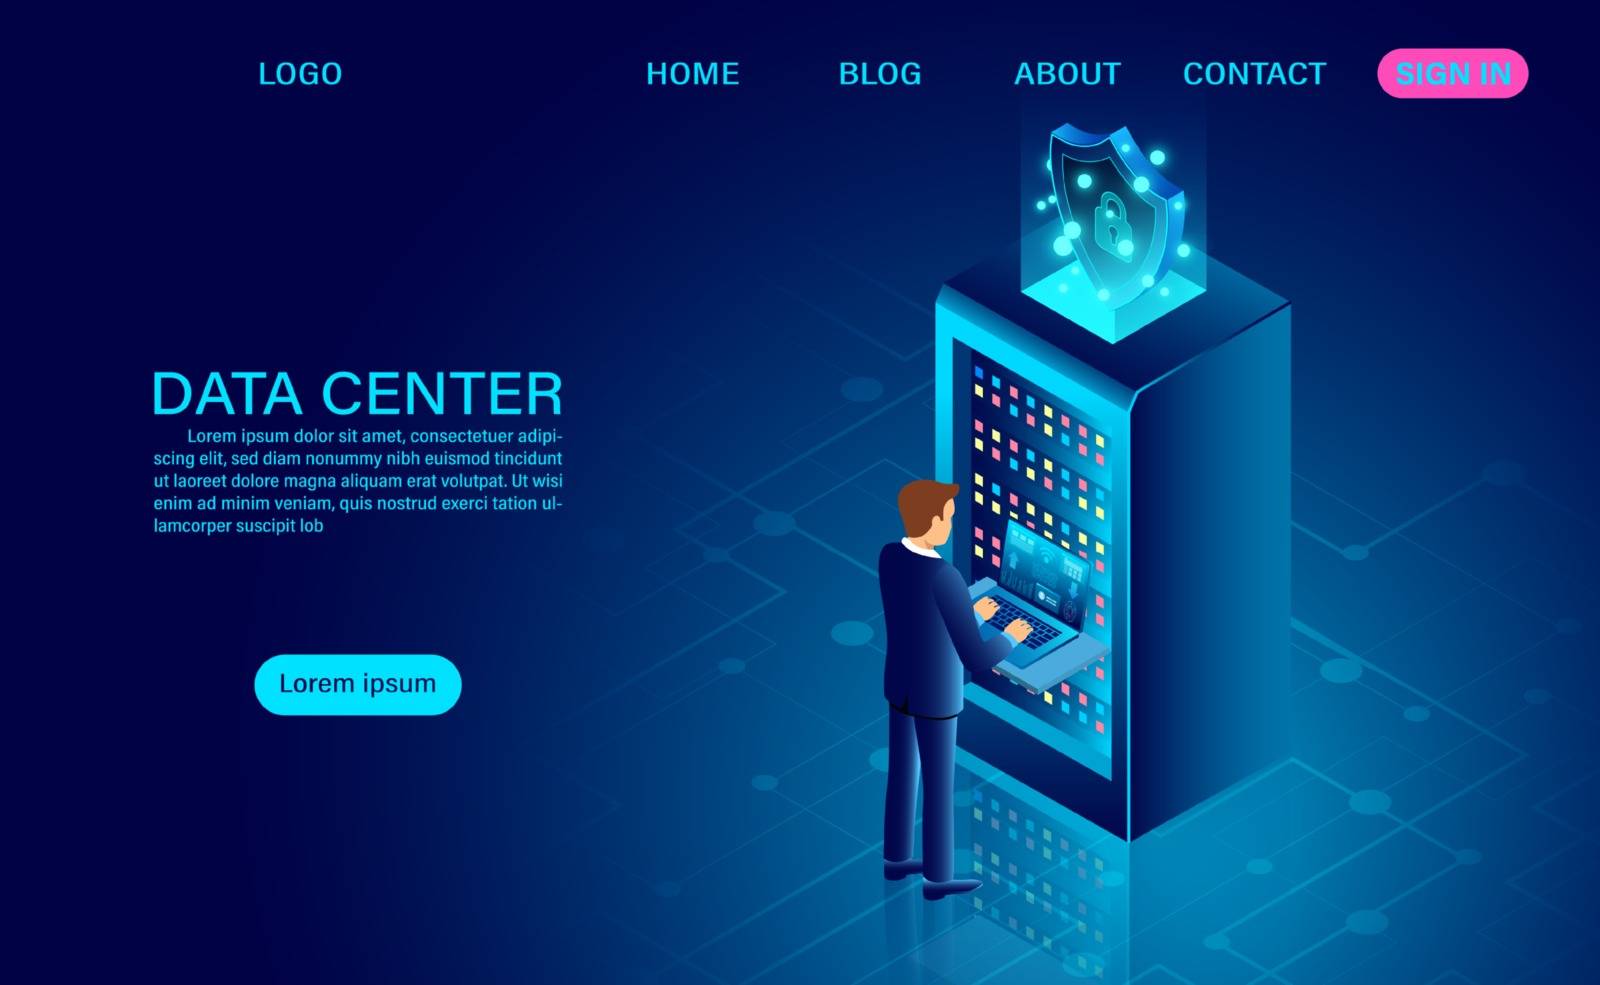 Data center server room and big data processing Protecting data security concept by Thanakorn02